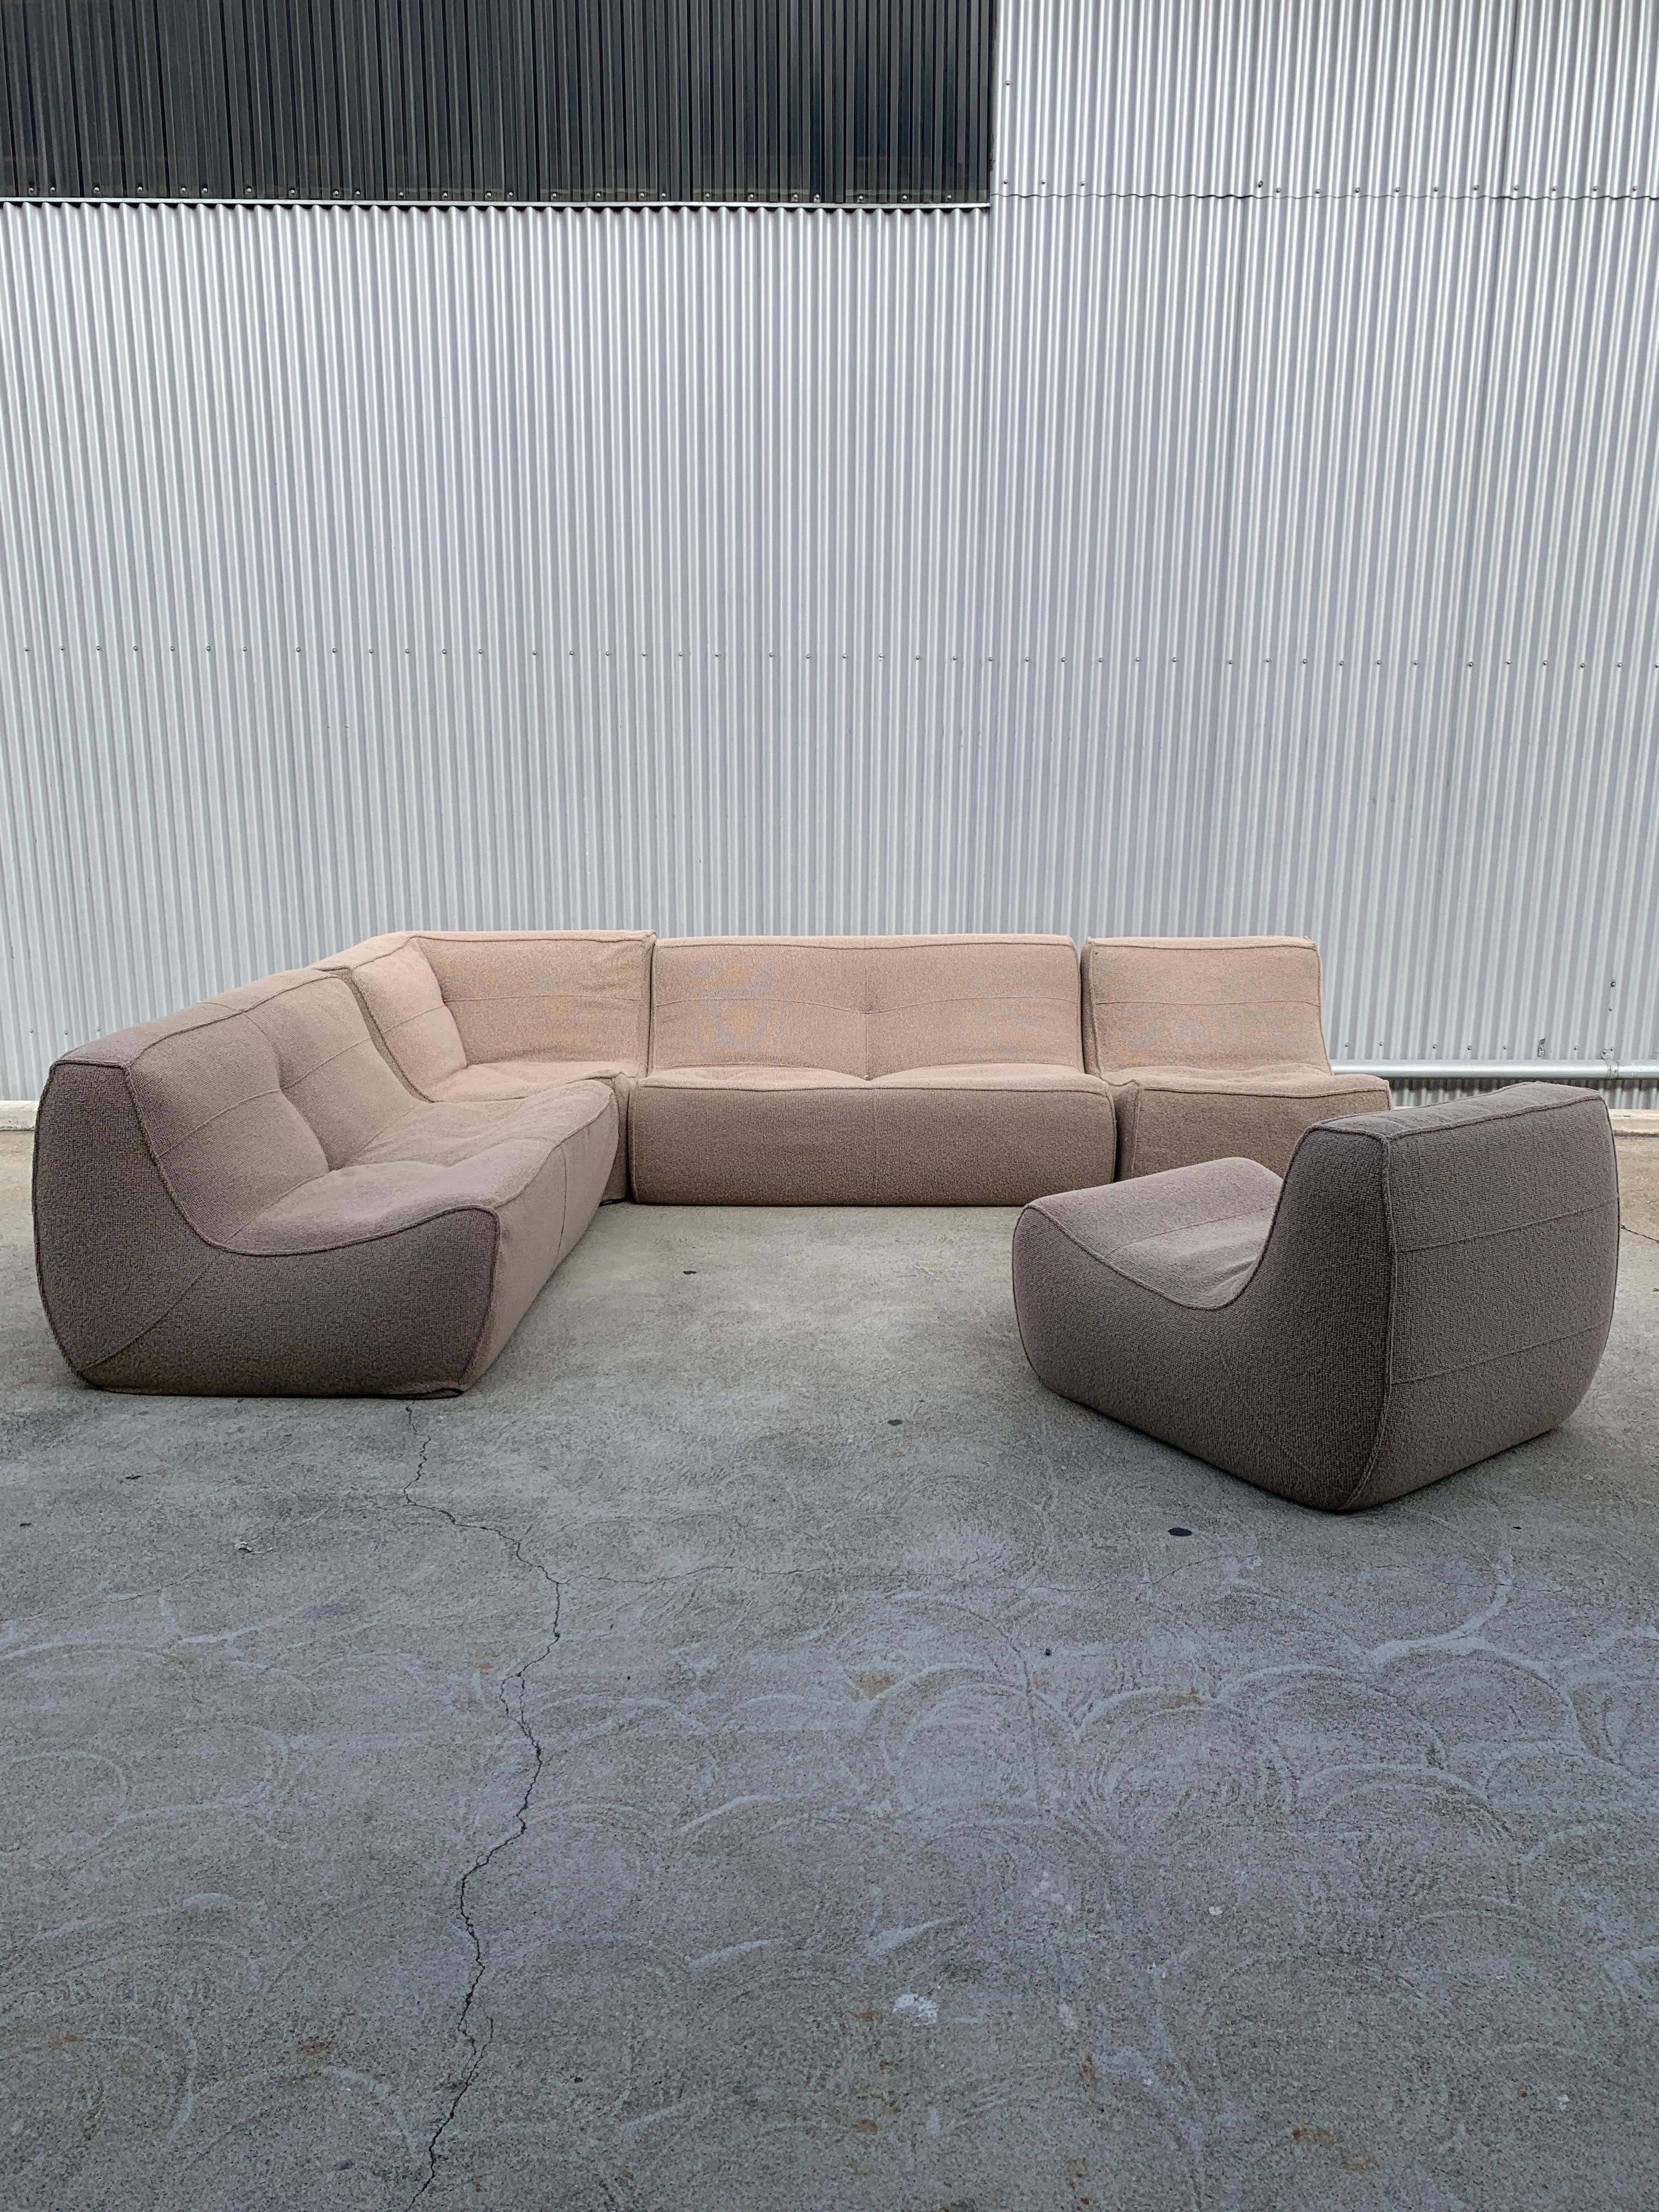 Plush foam and feather seat, and warm oatmeal boucle makes for instant relaxation while the contemporary styling makes for an interesting and sculptural scene.

Seating arrangement consists of 2 2-Seaters, 1 Corner, and 2 Chairs

Chair